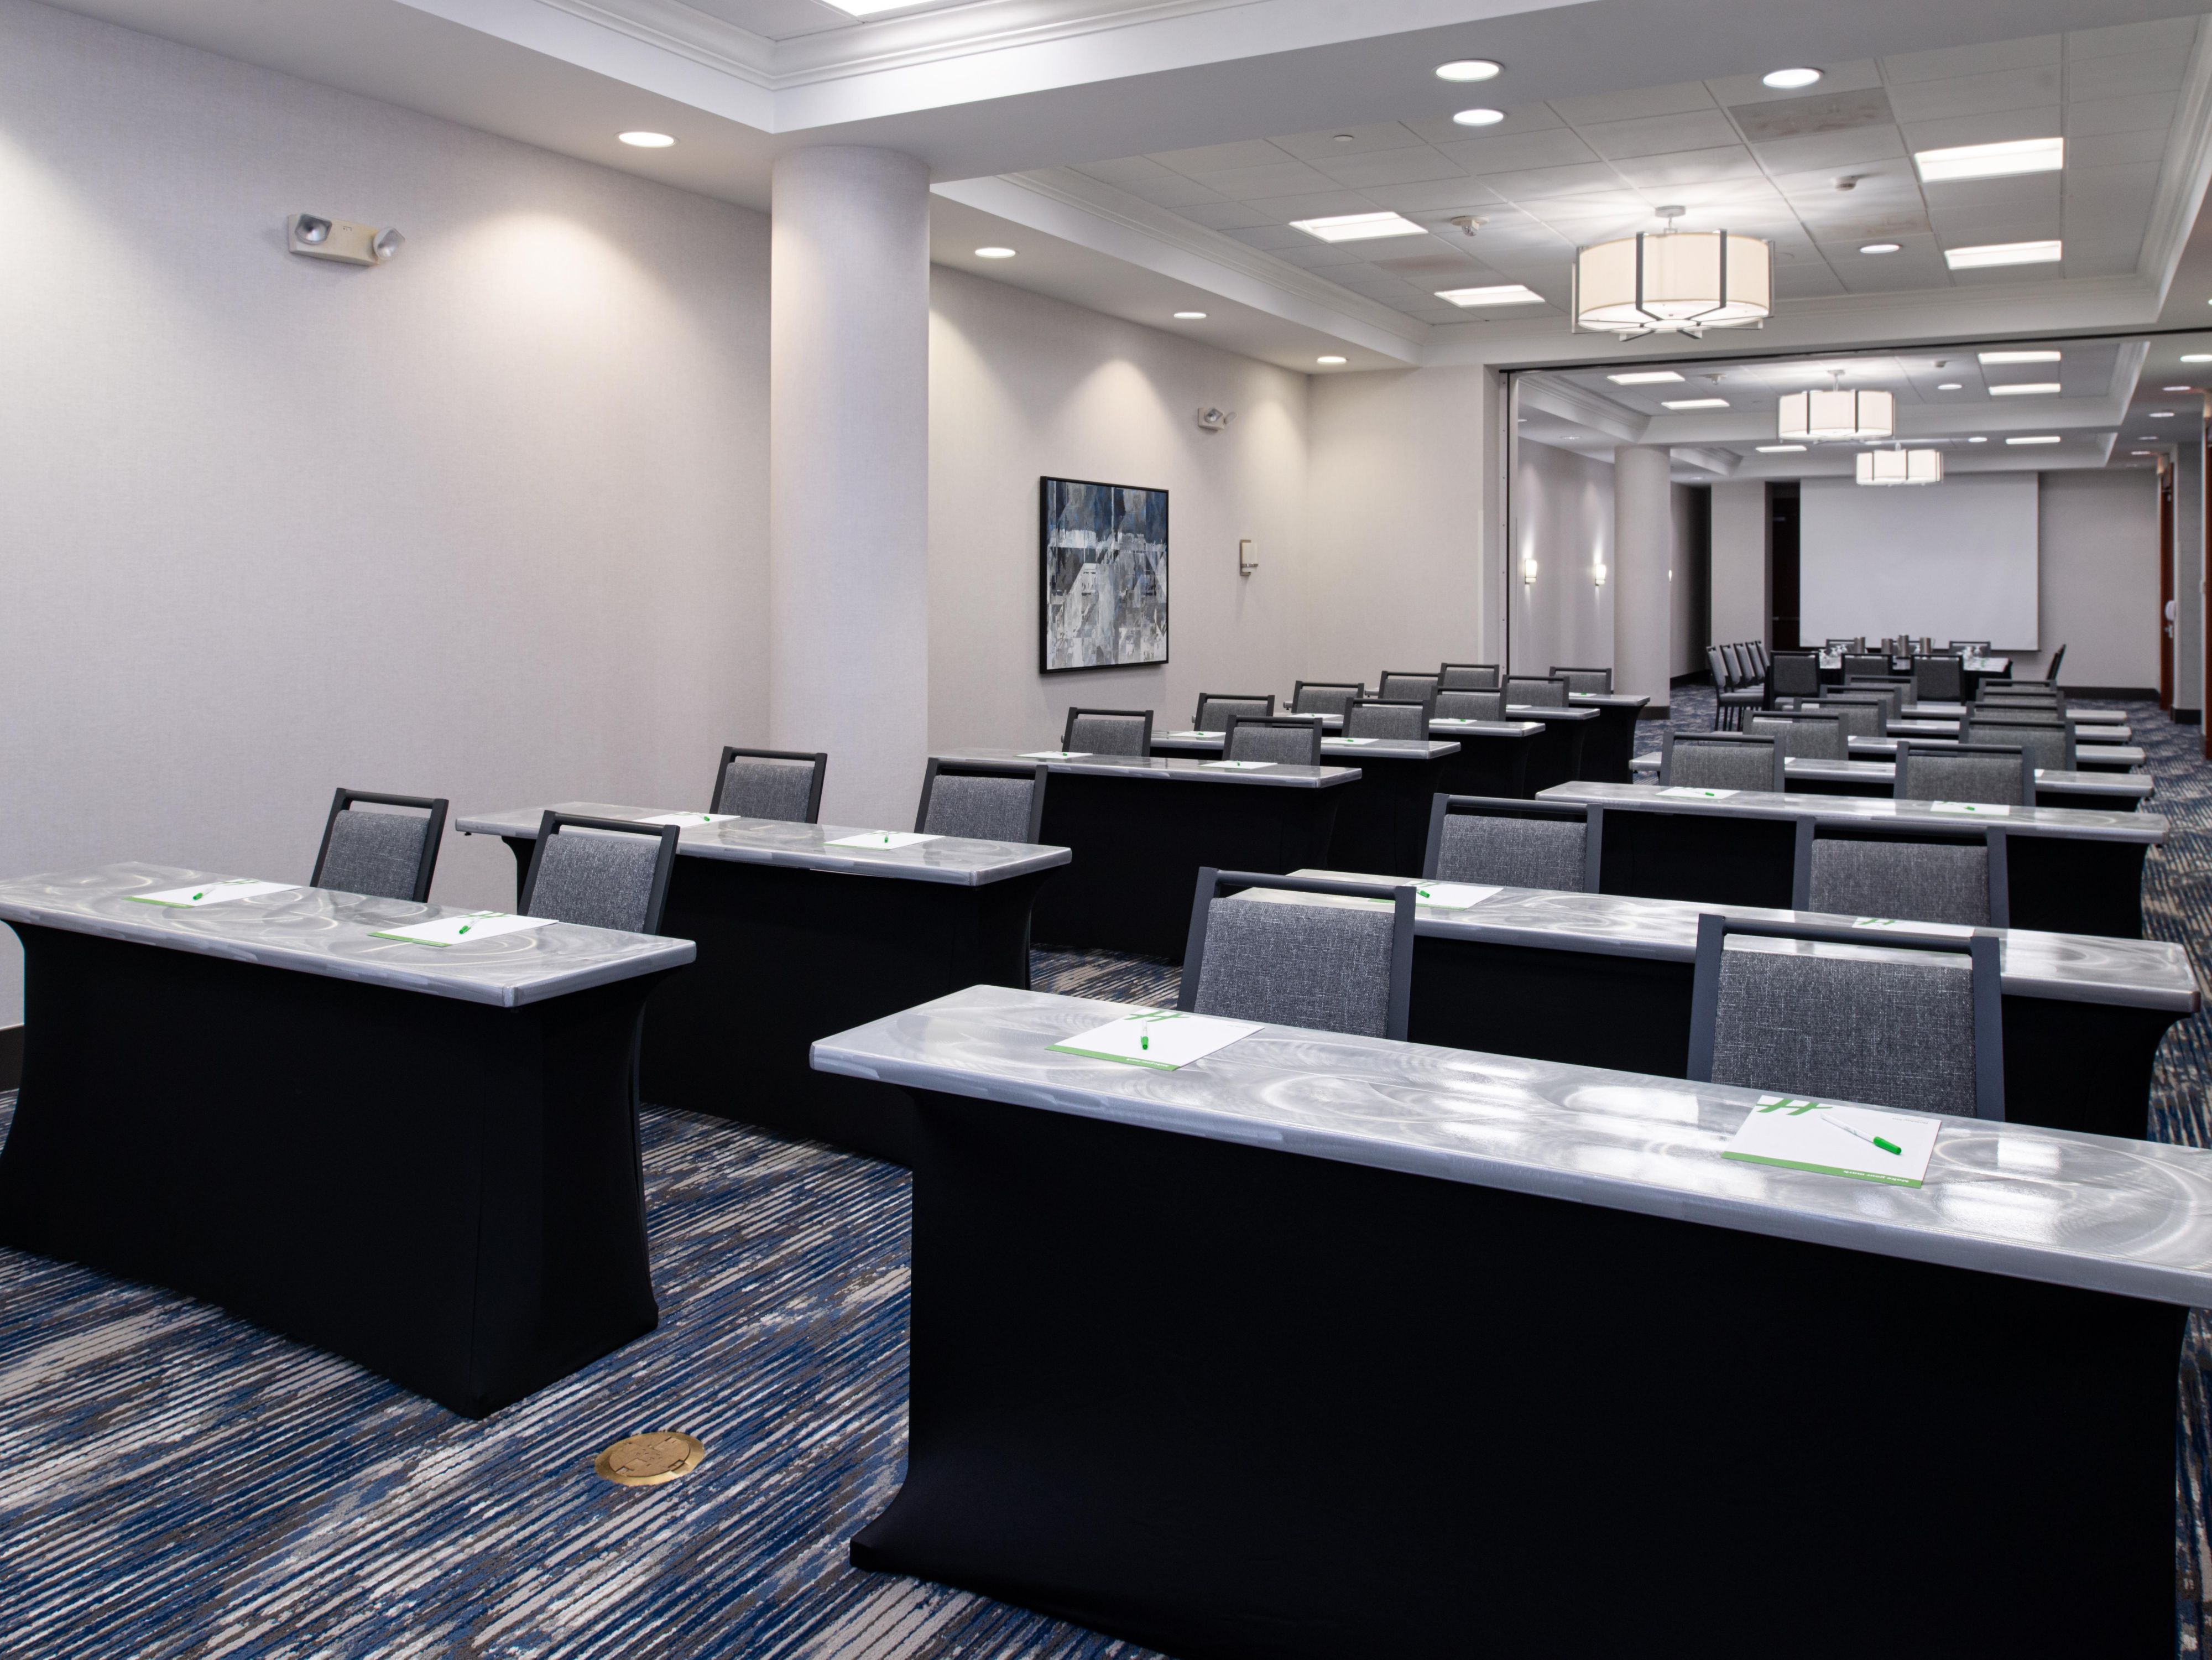 Host your next meeting or event with us in our renovated event spaces!
Our 11,000 square feet of newly renovated event space. Space include two ballrooms, eight meeting rooms and a Rooftop event space with views of the Charlotte skyline. Fully customized event + menu planning is offered by our experienced Meeting Specialists. 
